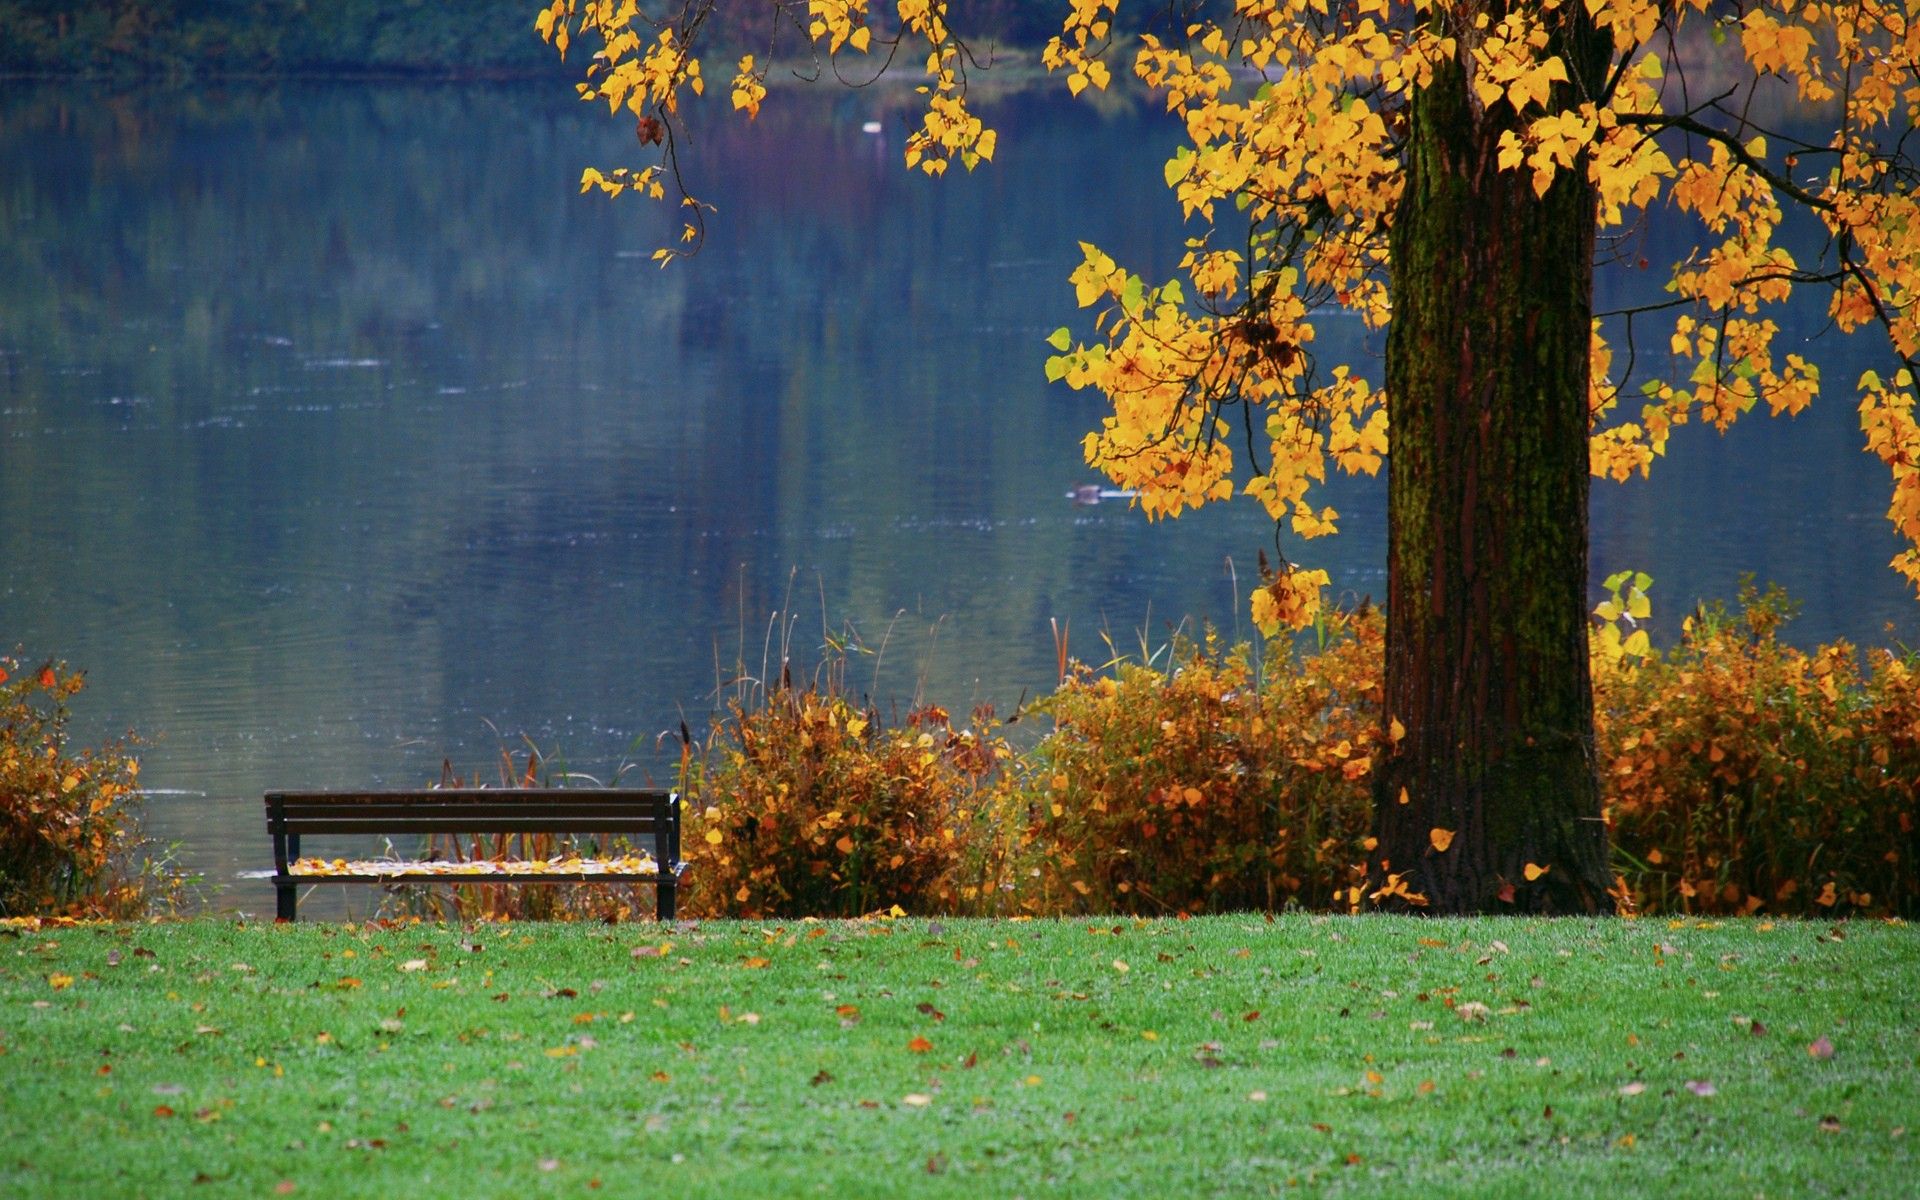 Bench under a tree wallpaper and image, picture, photo